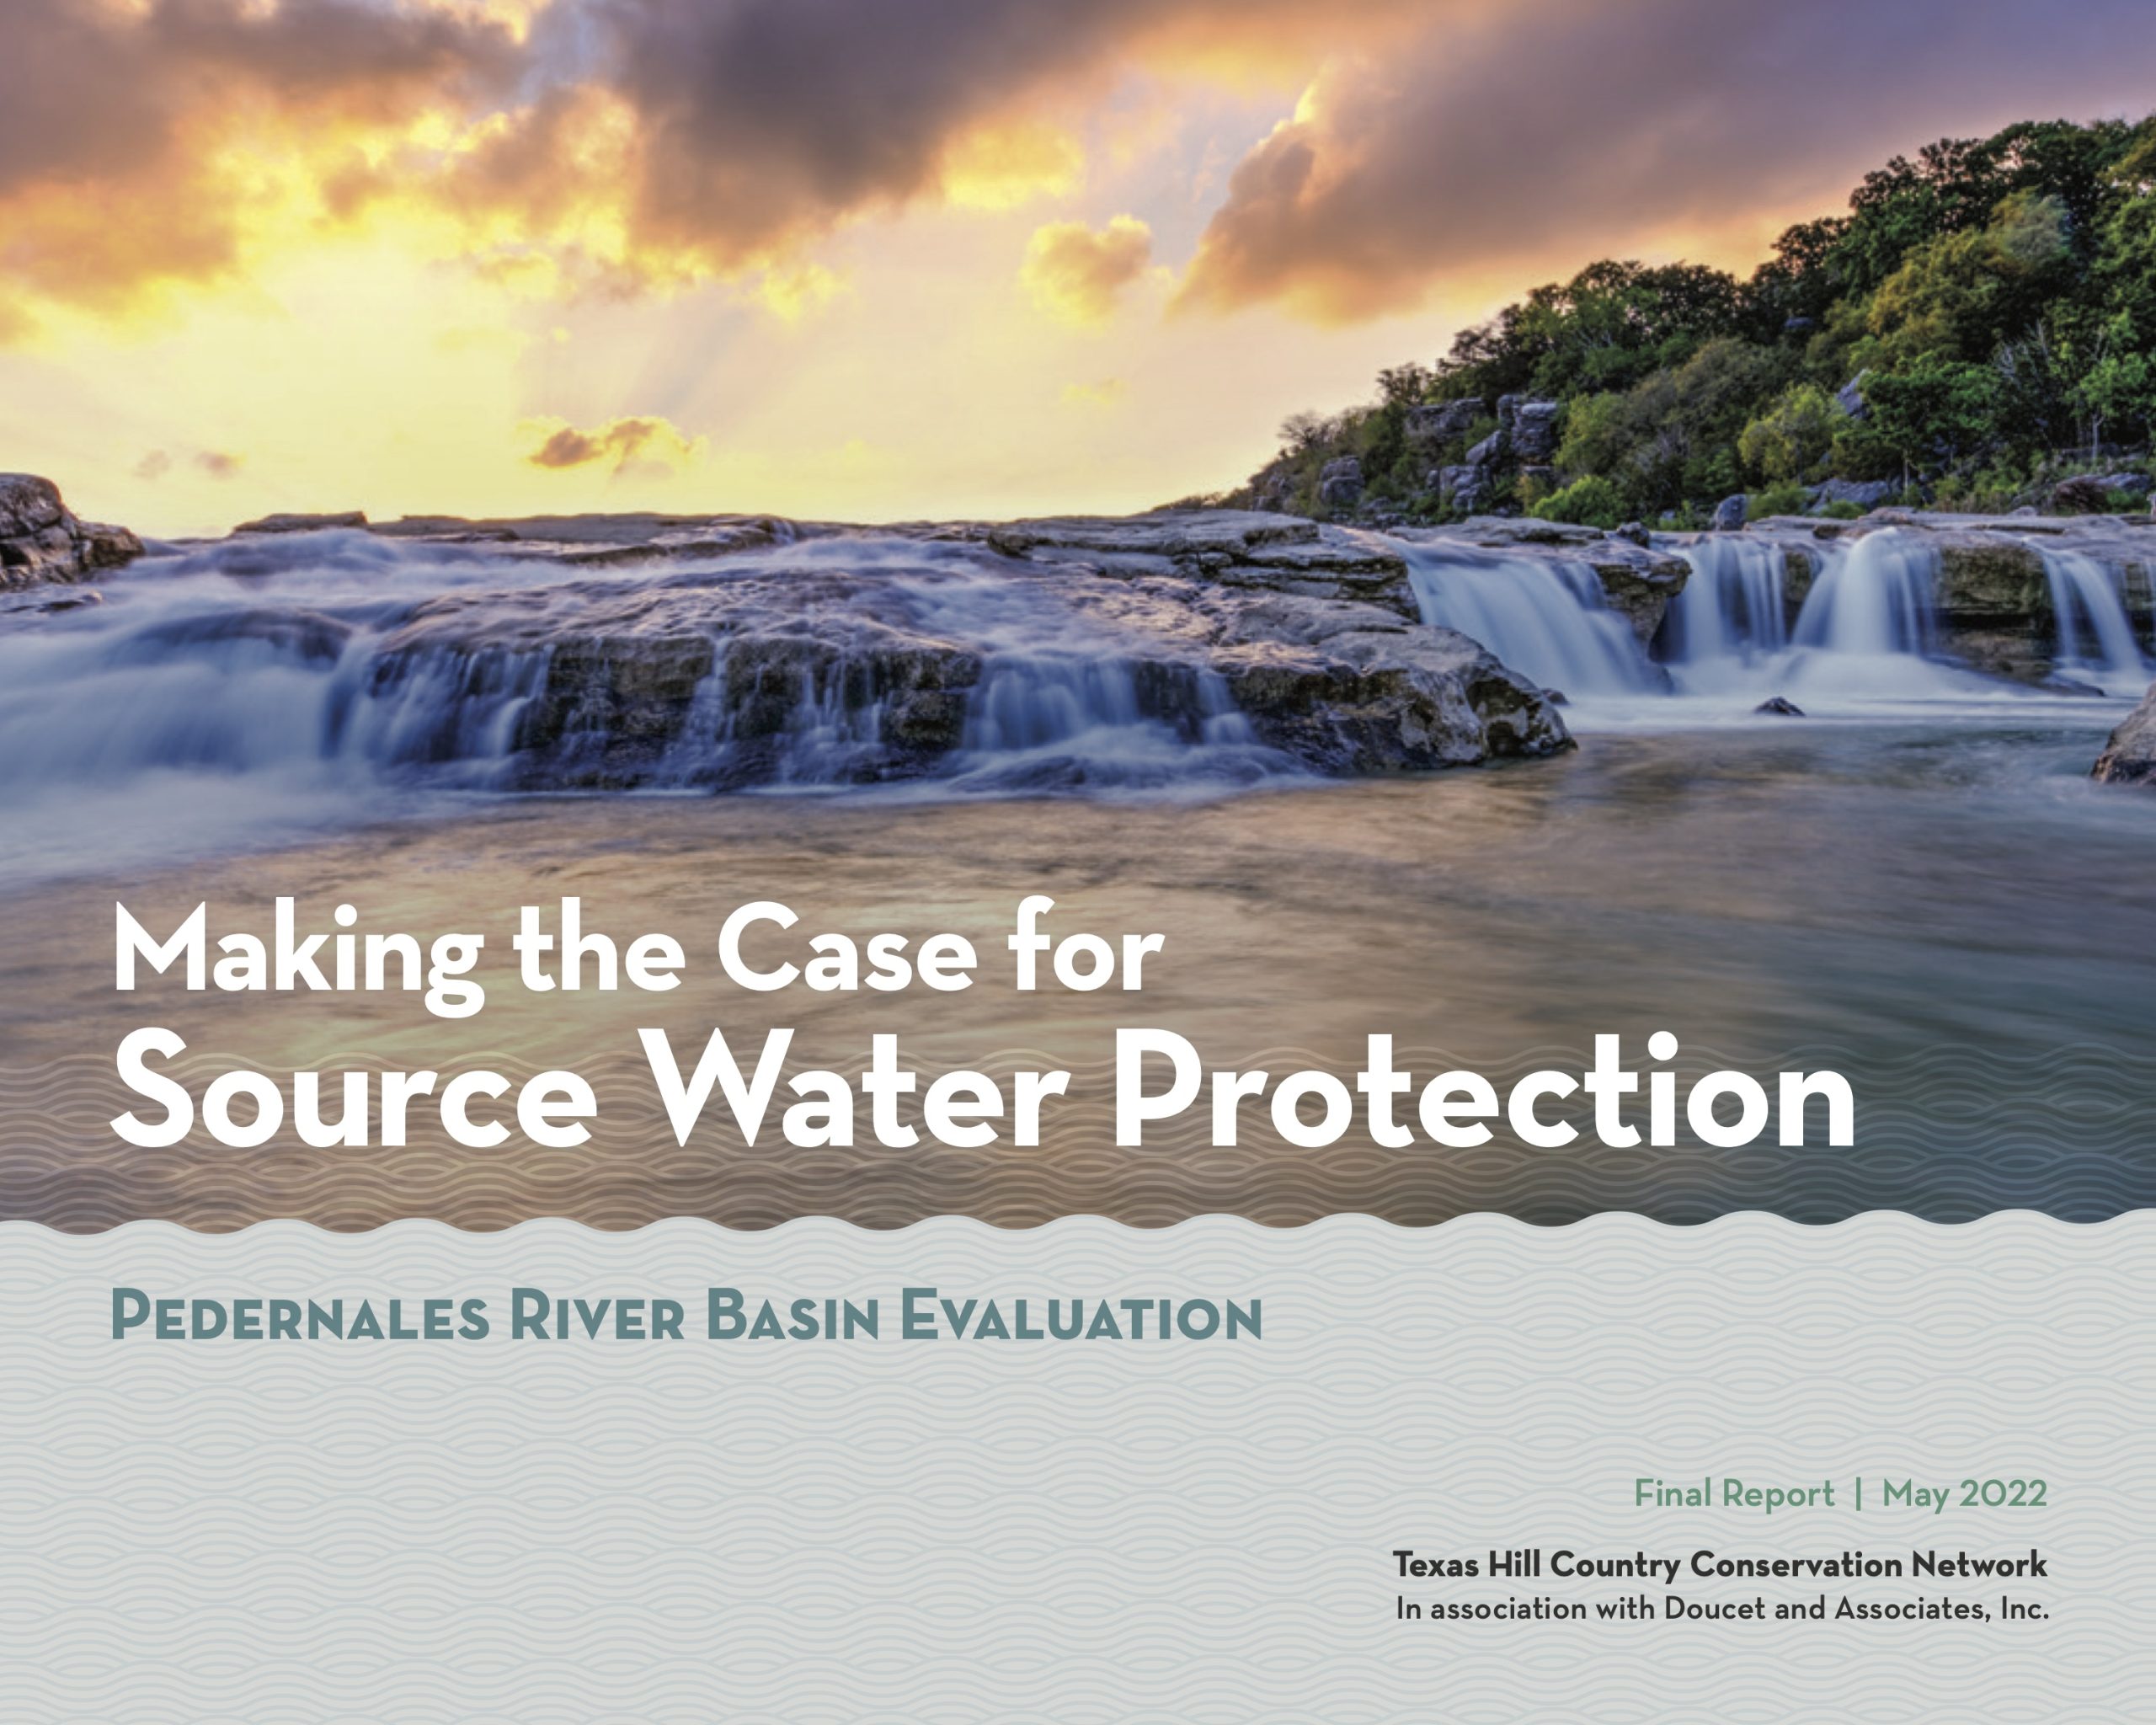 A waterfall flows under a bright sunset on the cover of the report "Making the Case for Source Water Protection: Pedernales River Basin Evaluation" - Texas Hill Country Conservation Network and Doucet and Associates